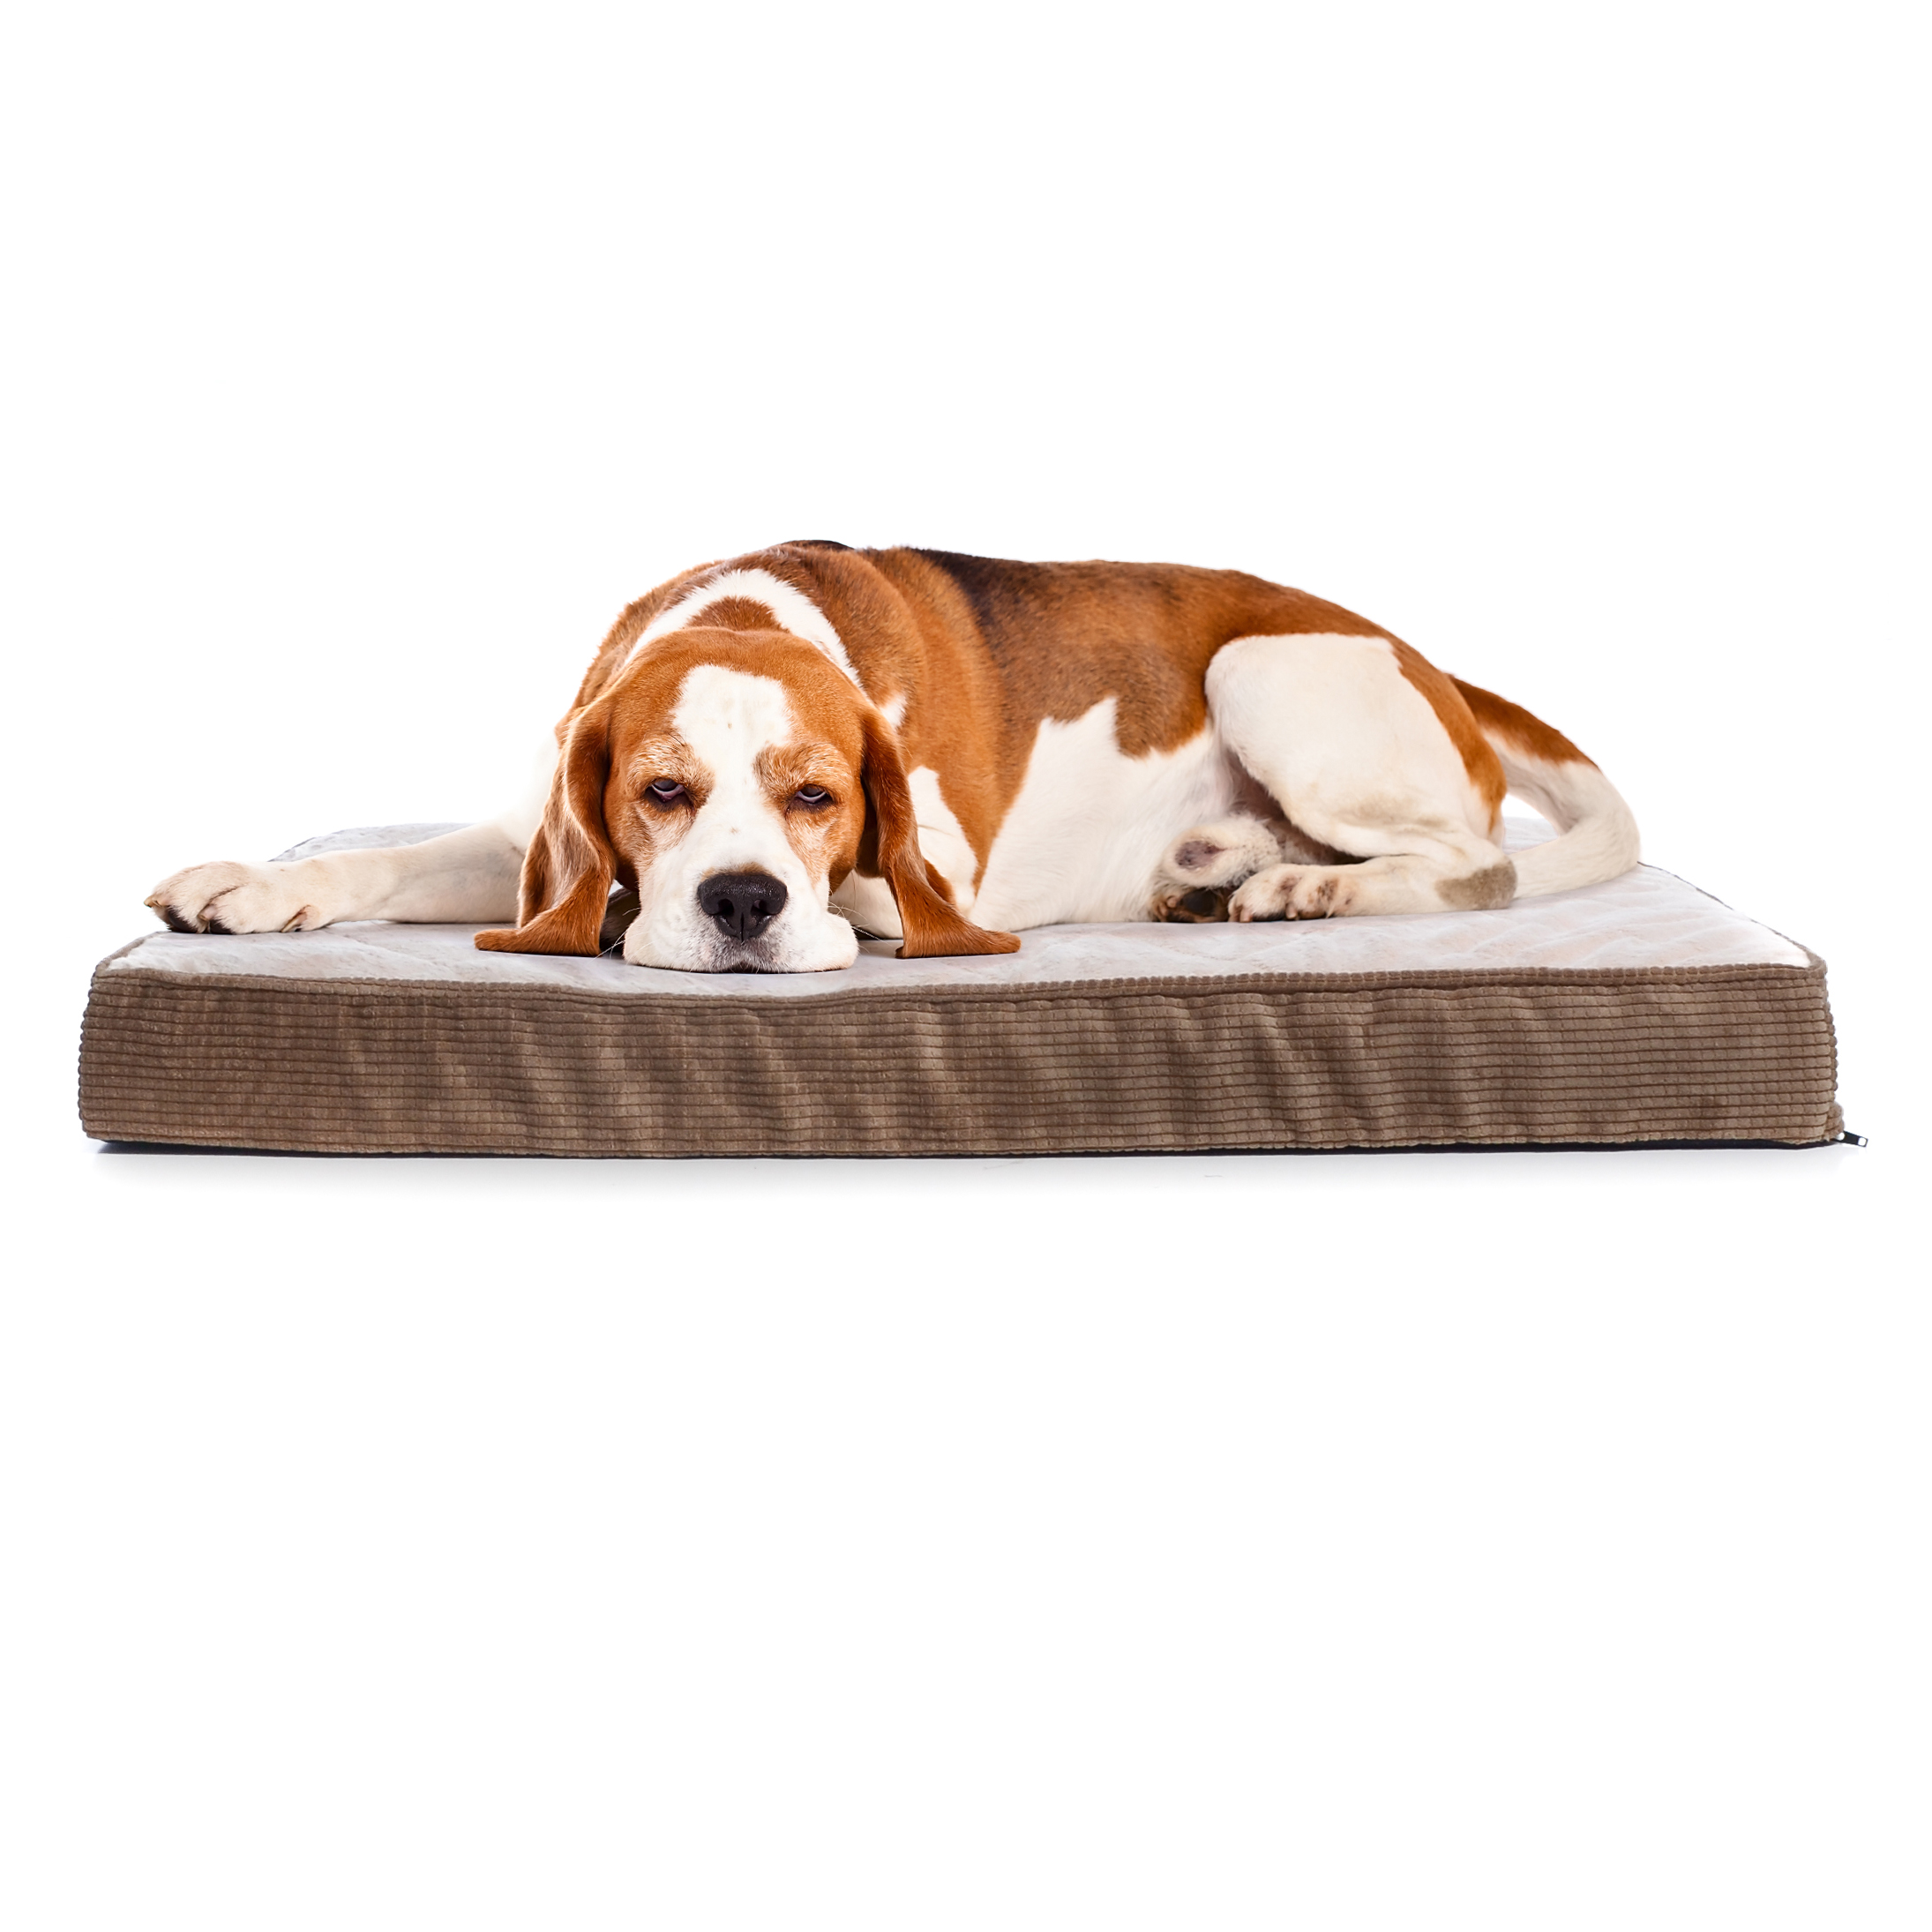 Milliard Quilted Padded Orthopedic Dog Bed, Egg Crate Foam with Plush Pillow Top Washable Cover (41 inches x 27 inches x 4 inches) - image 5 of 7